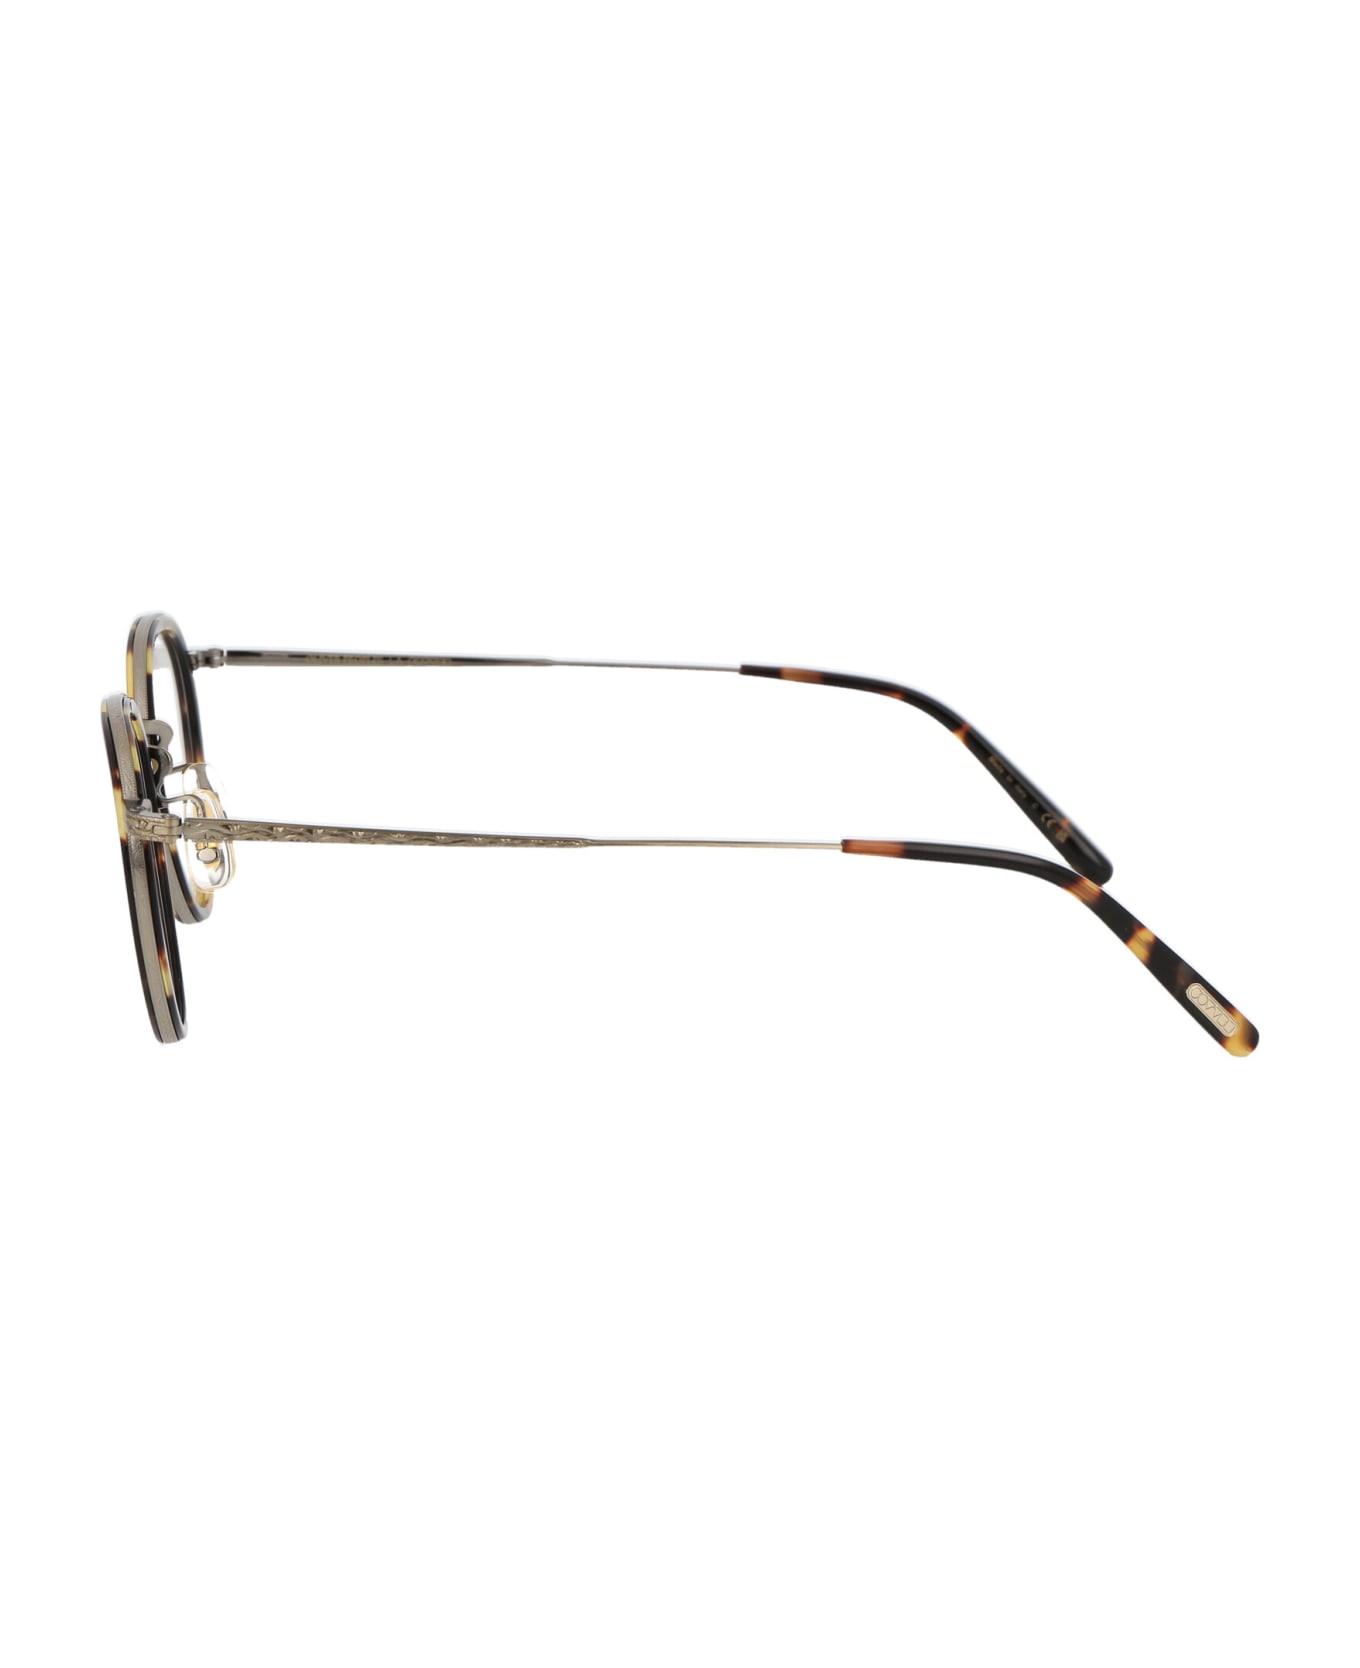 Oliver Peoples Mp-2 Glasses - 5039 WARNING: California Proposition 65